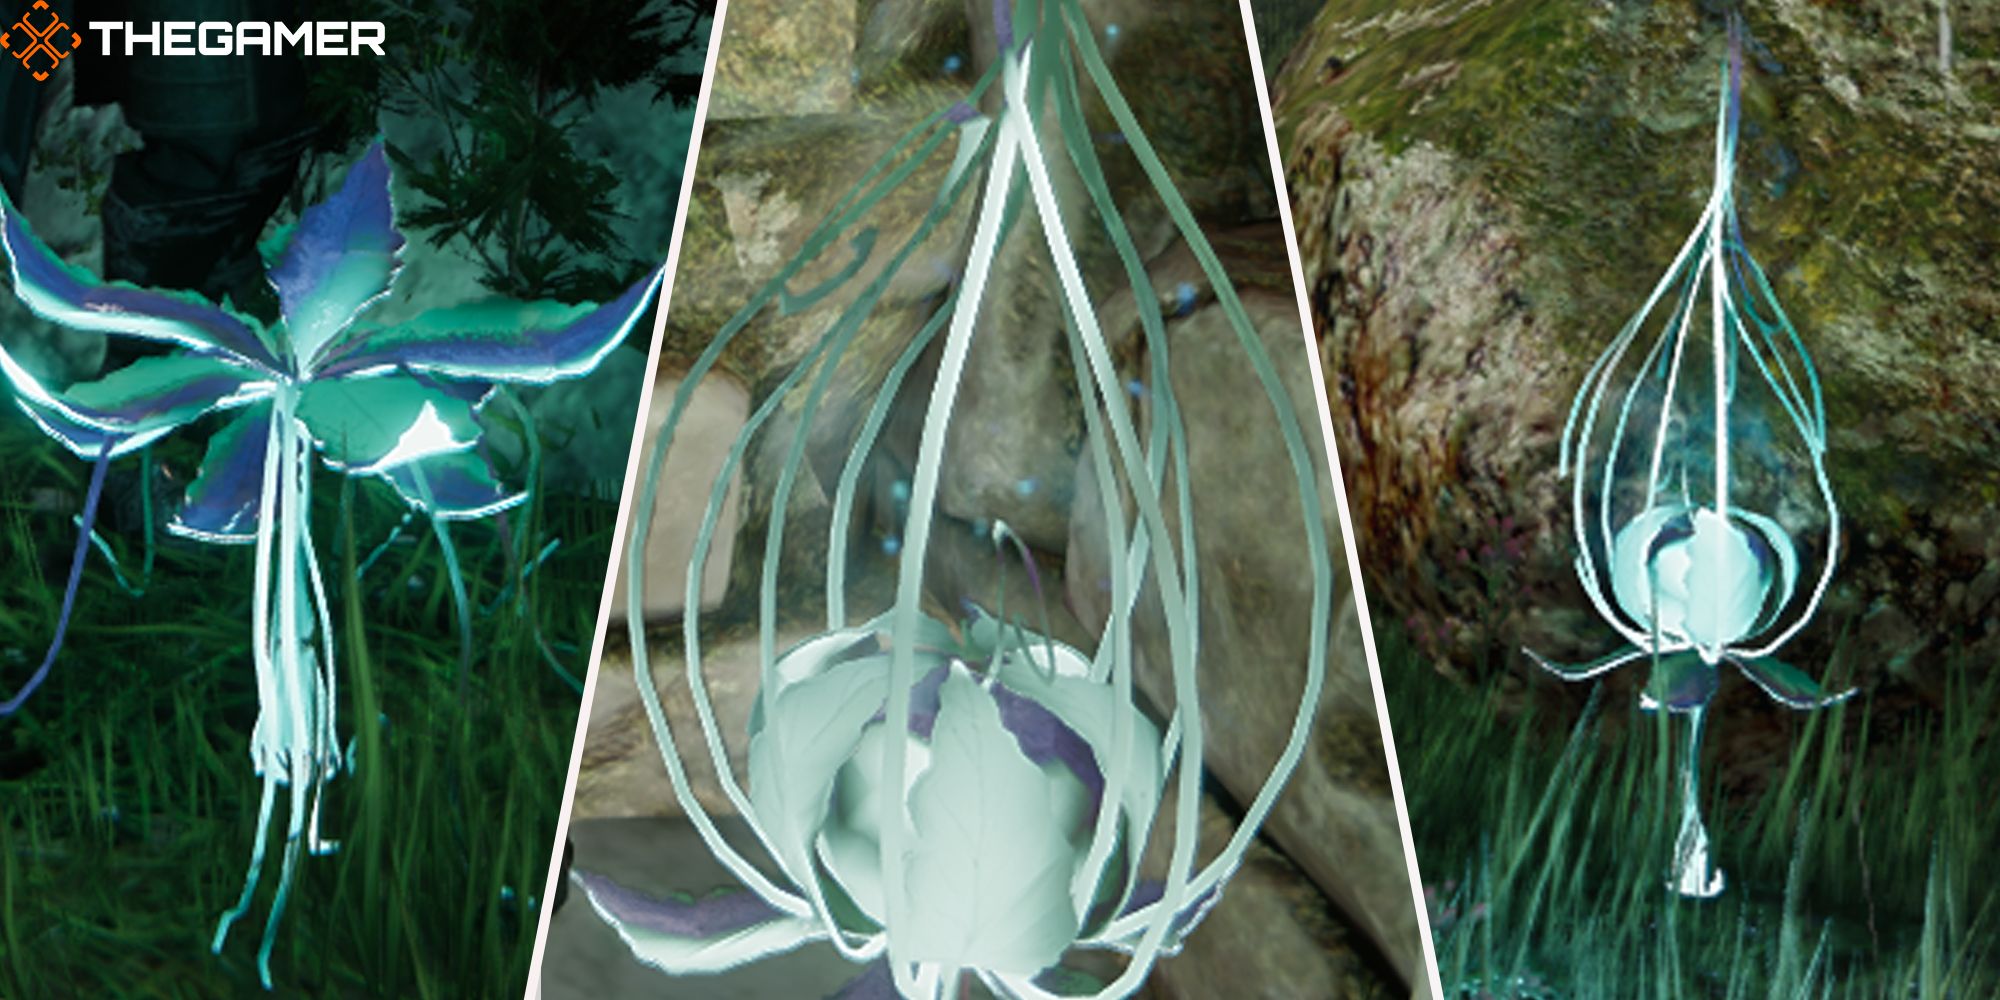 A three panel pyramid-split image featuring three different crystal fruits from Edge of Eternity.